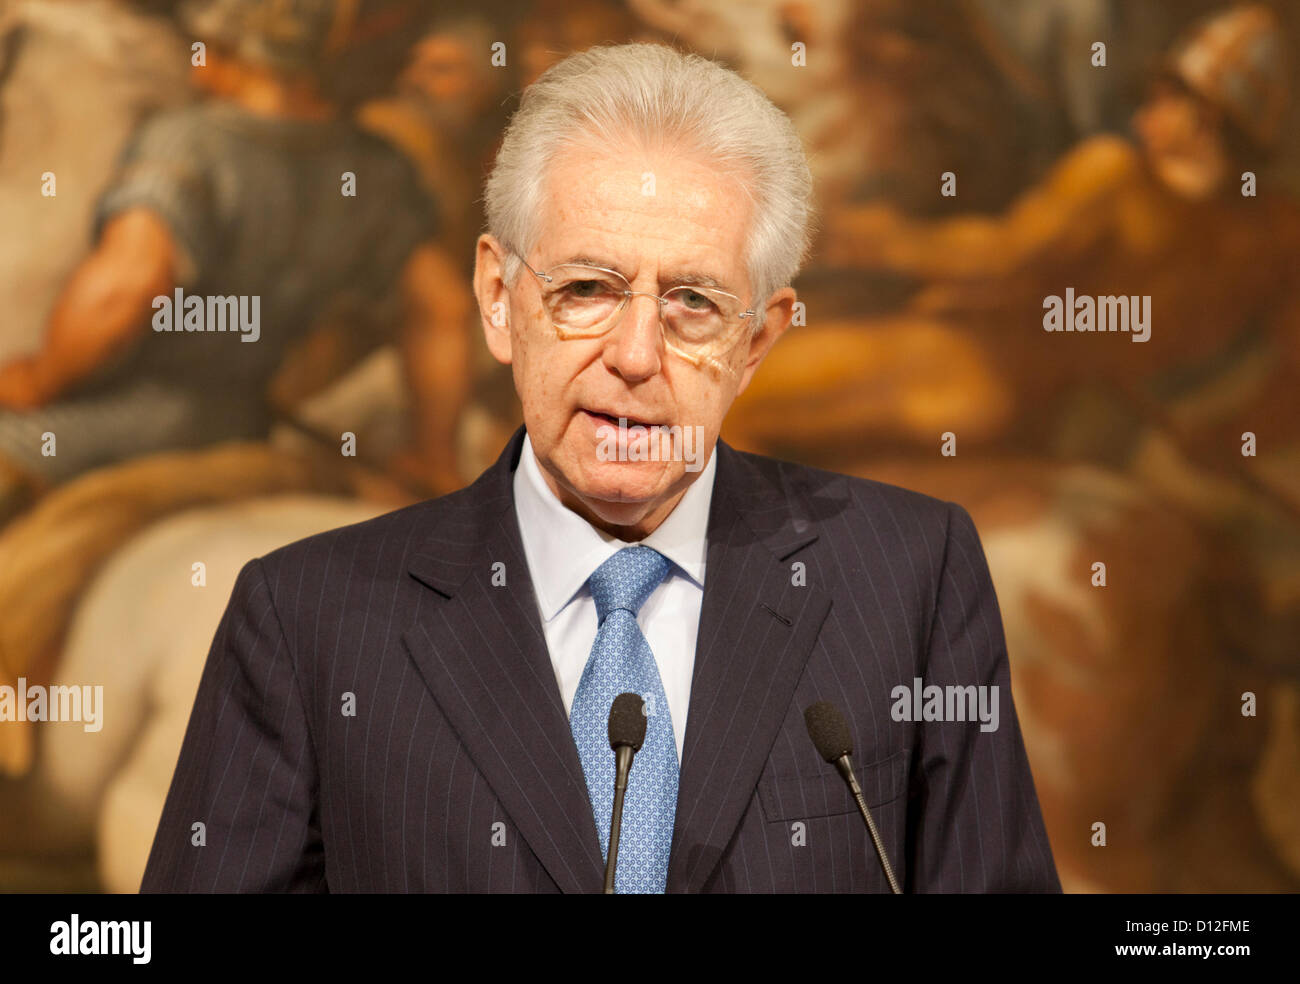 Tuesday December 5th 2012. Rome, Italy. Italian Prime Minister Mario Monti and Lebanese Prime Minister Najib Mikati hold a press conference following talks between the two leaders. Stock Photo